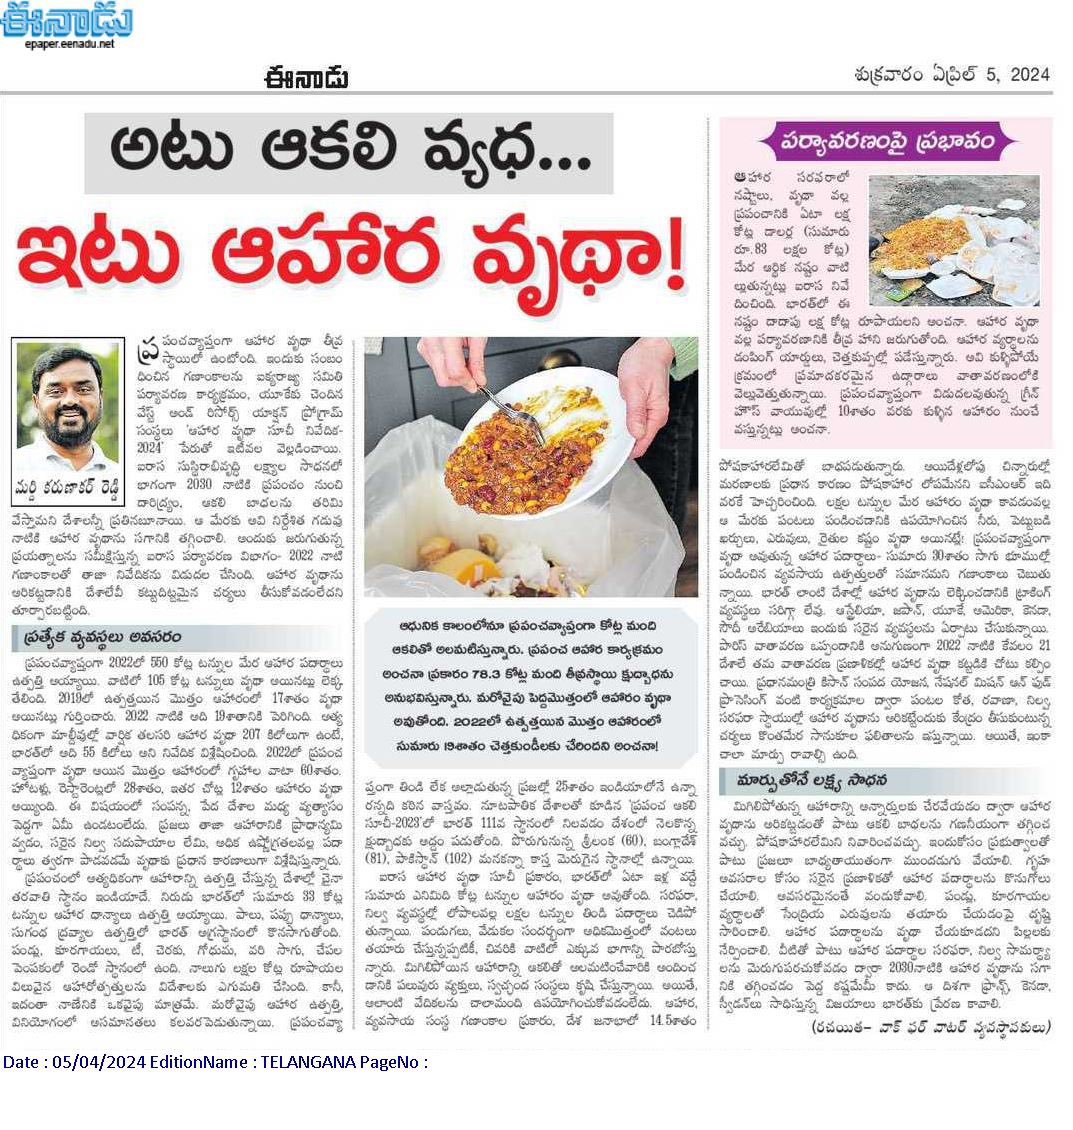 Let’s spark change together! My editorial on food waste and hunger issues, published in @eenadulivenews , sheds light on the pressing global and Indian realities. Let’s unite to combat food waste, alleviate hunger, and build a more sustainable future. Join me in the journey